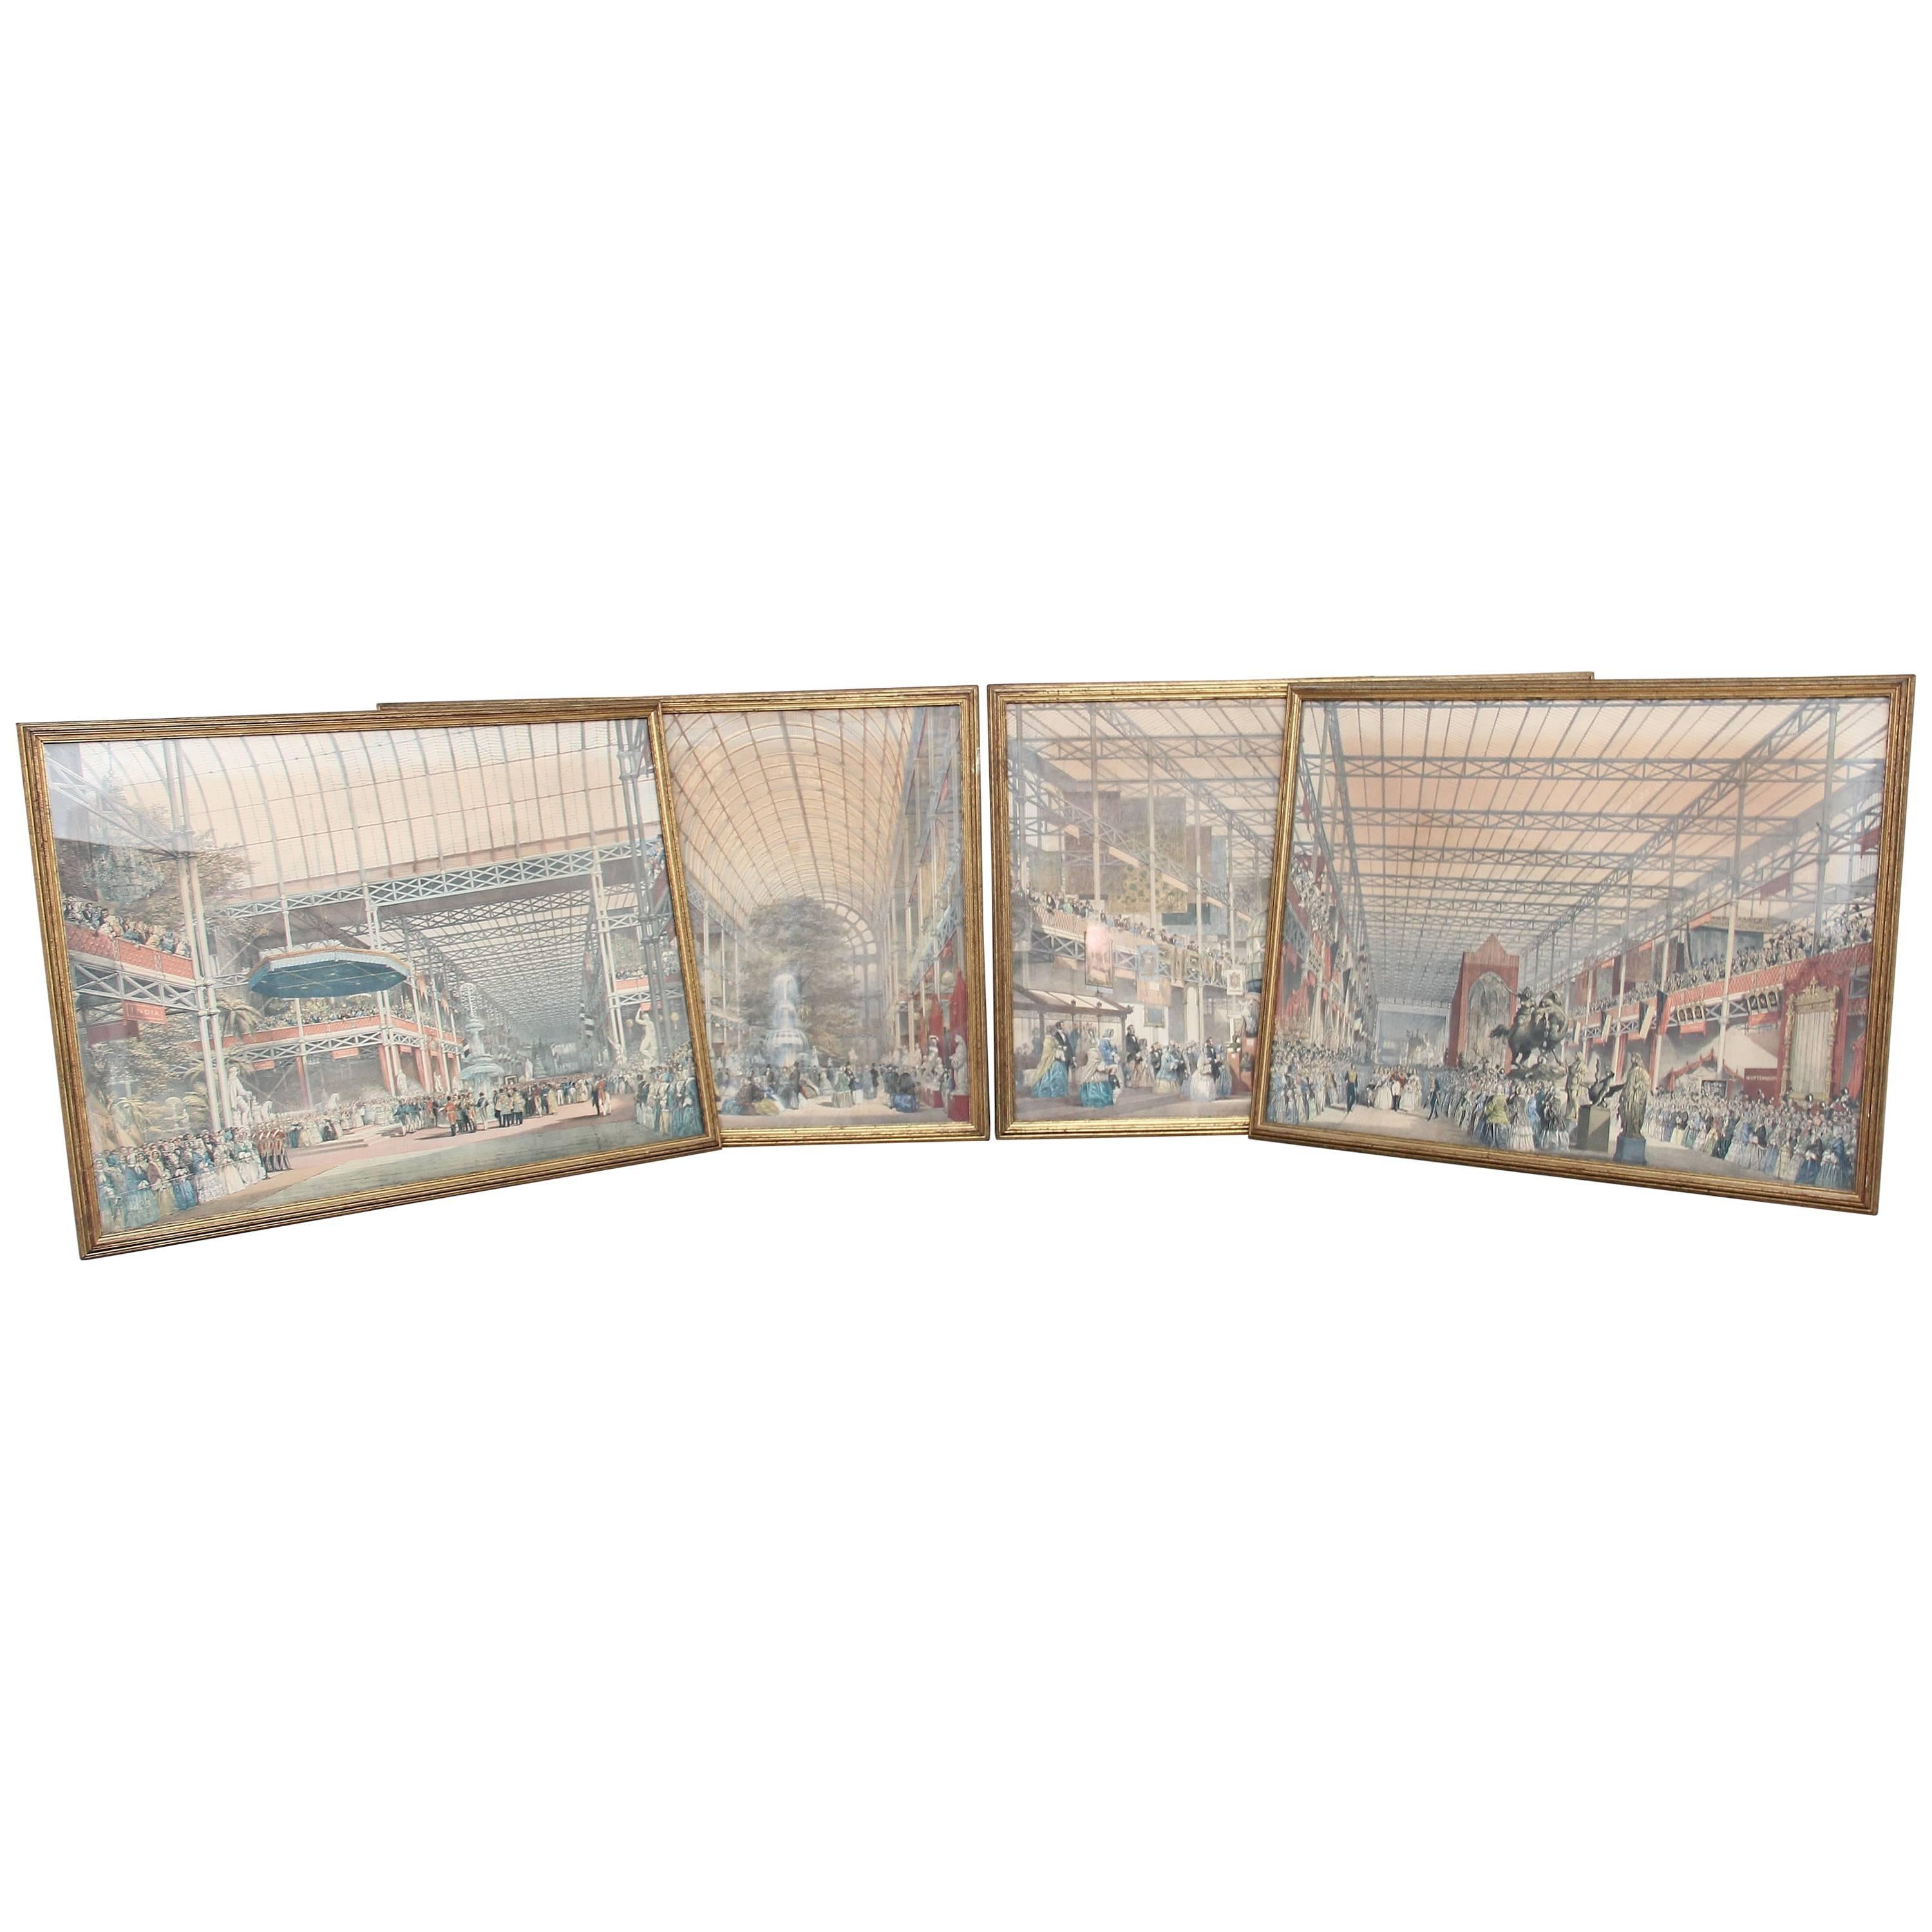 Set of Four 19th Century Hand Colored Prints of the 1851 Great Exhibition